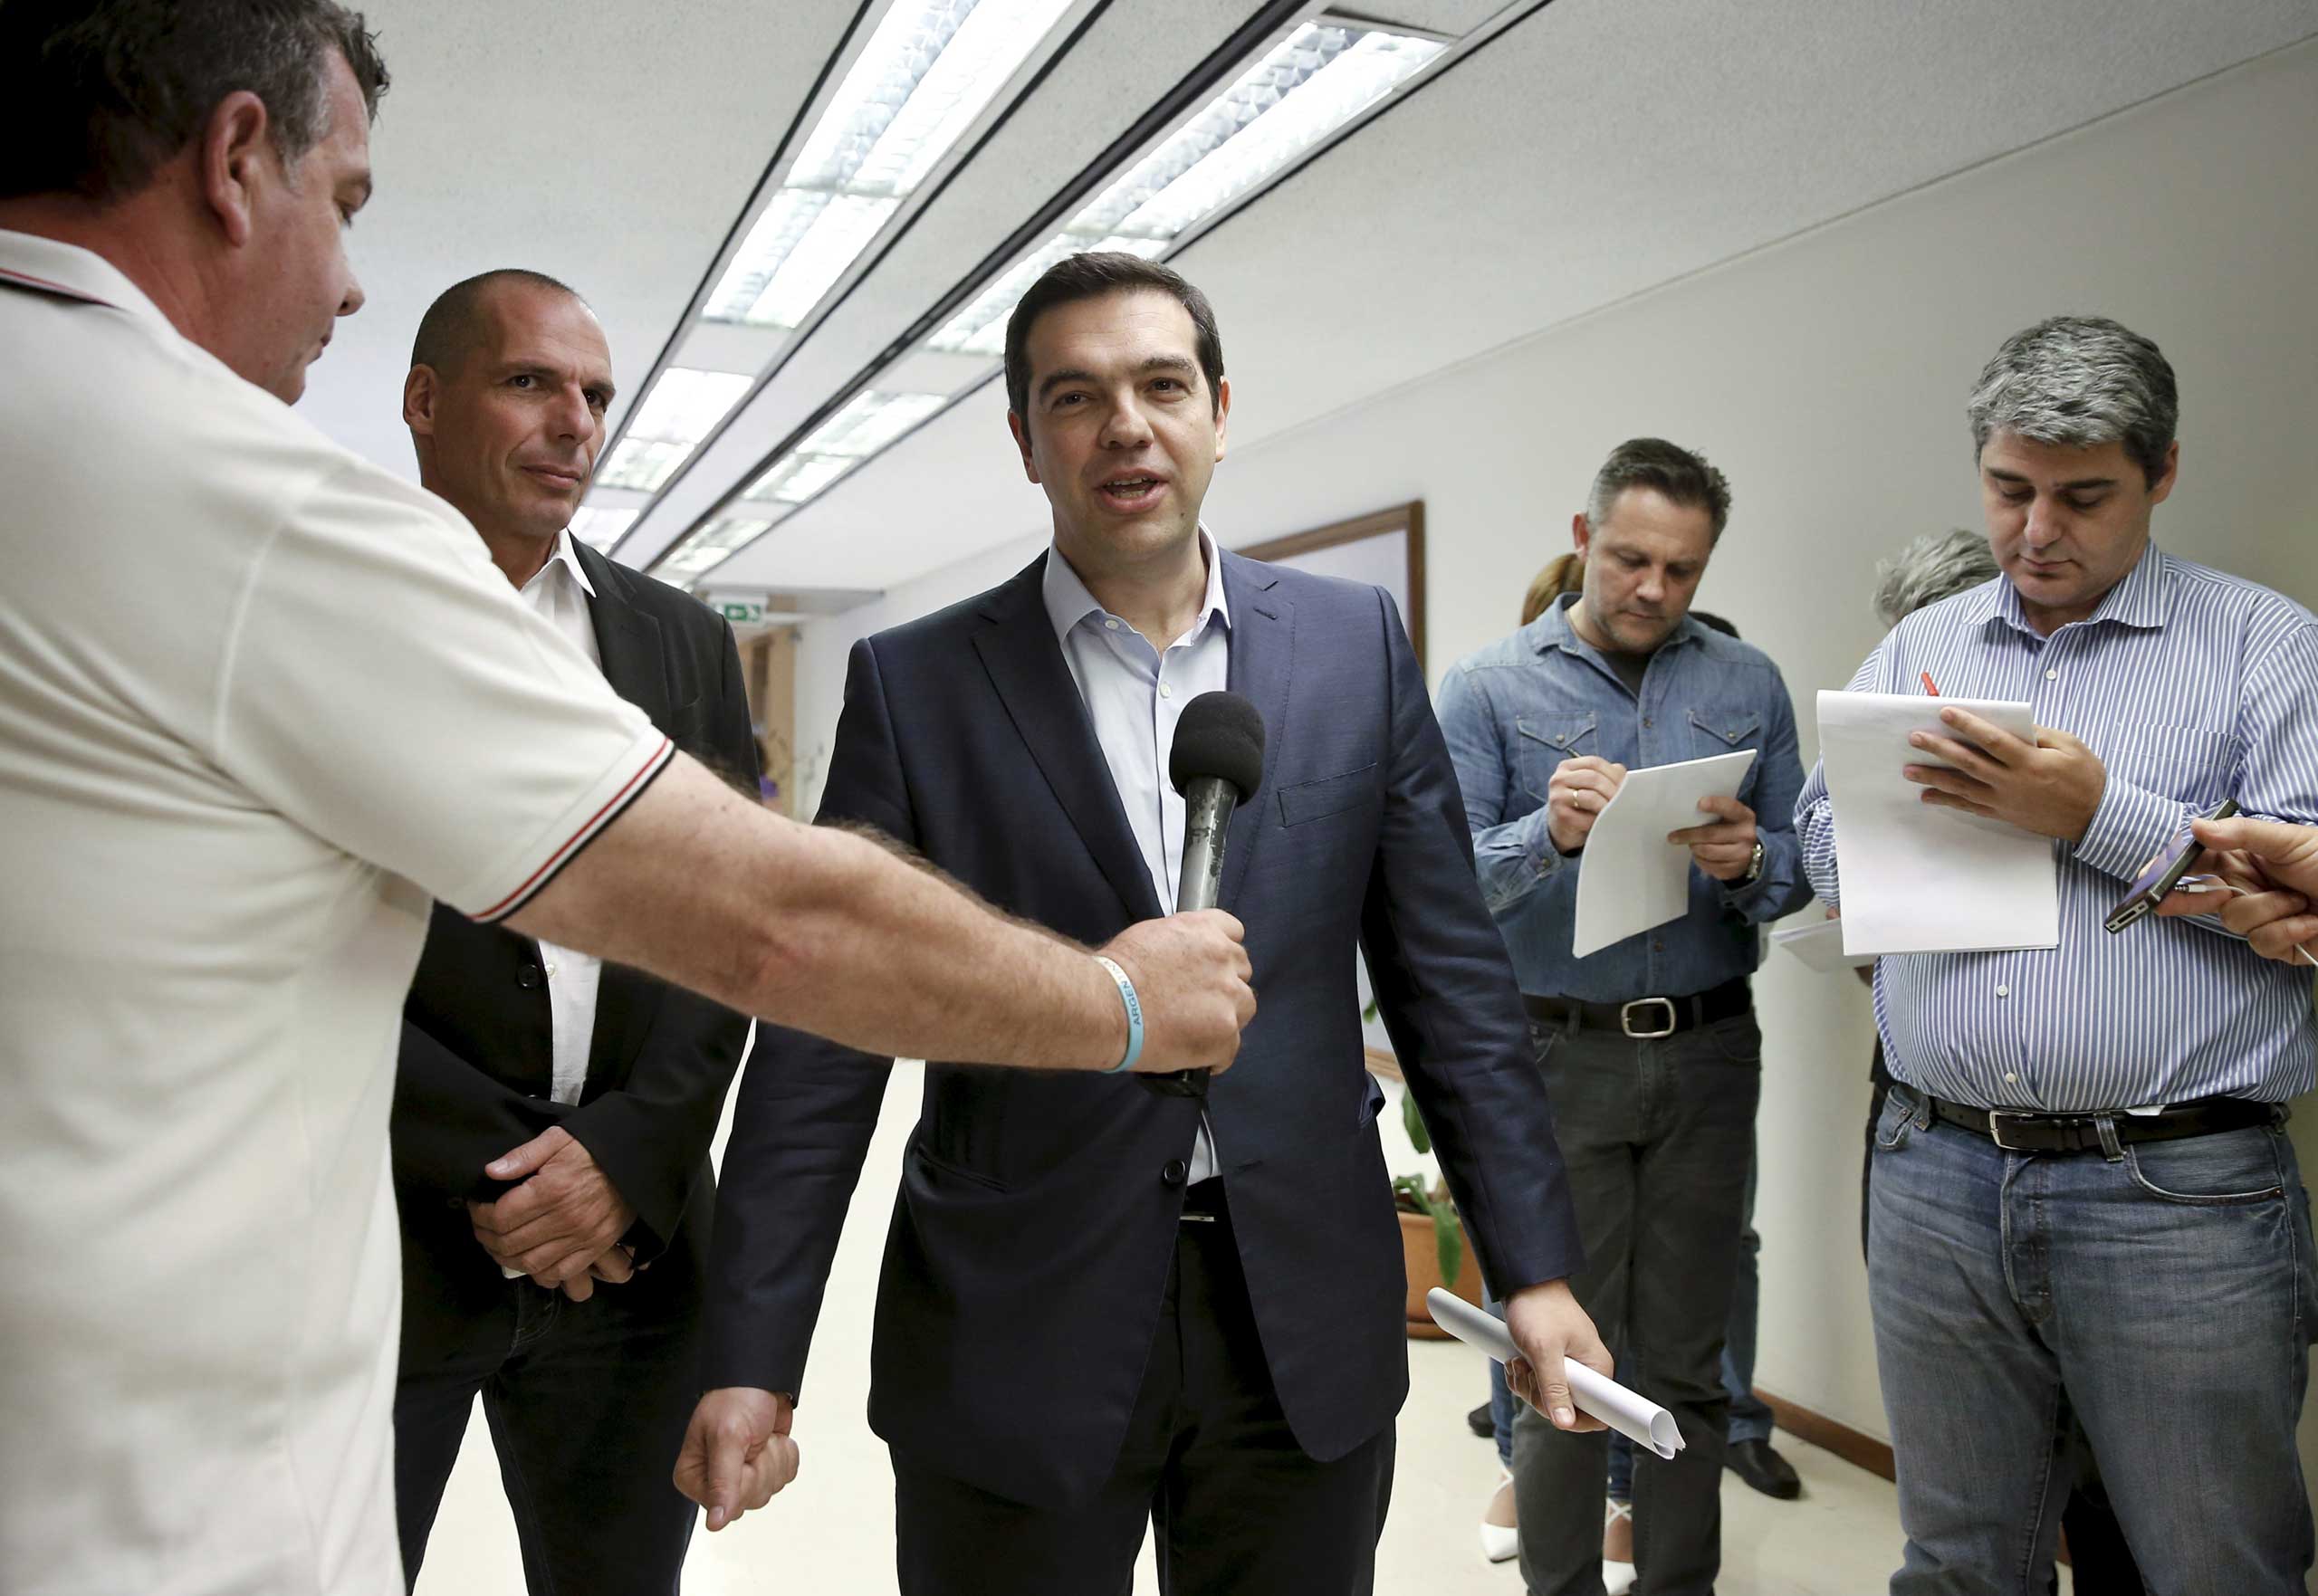 Greek Prime Minister Alexis Tsipras (C) makes statements to the media as Finance Minister Yanis Varoufakis (2nd L) looks on after a meeting at the ministry in Athens May 27, 2015.